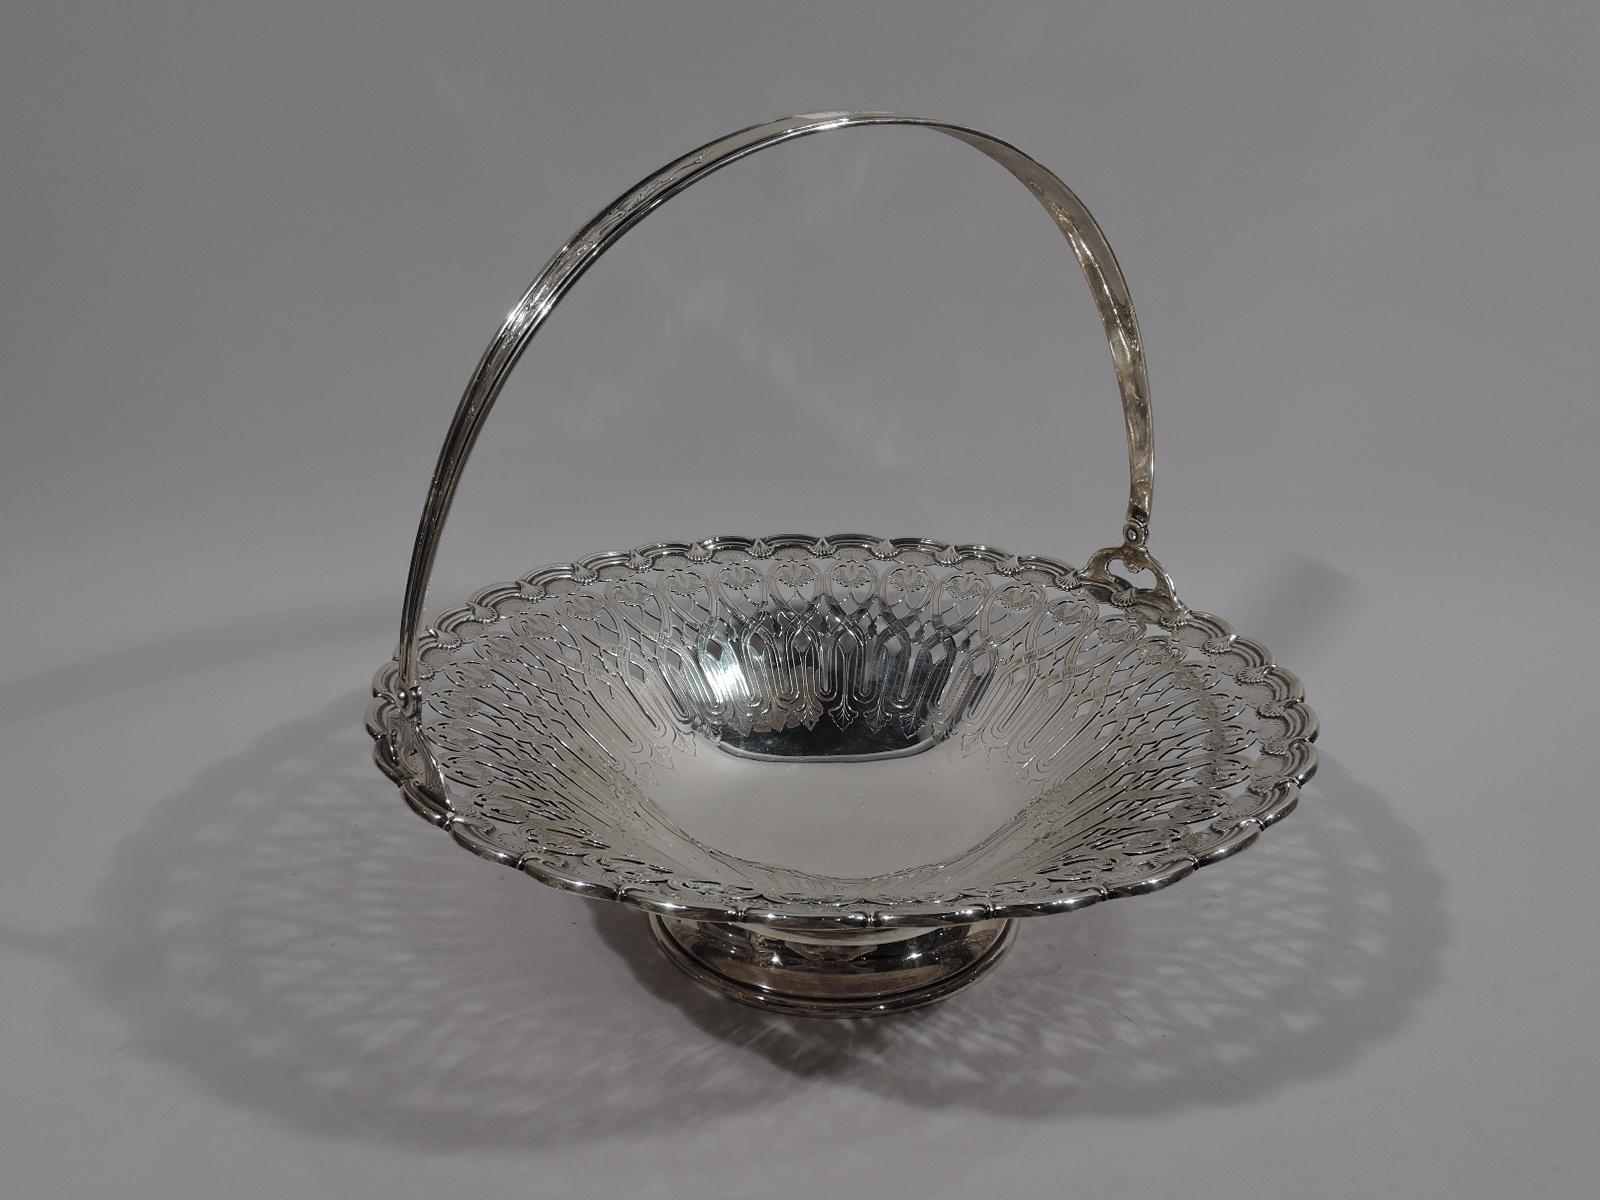 Large Edwardian Art Nouveau sterling silver basket. Made by Tiffany & Co. in New York, circa 1907. Bowl has solid center with engraved leaves and tendrils, surrounded by pierced interlaced scroll and leaf pattern heightened with engraving. Rim has